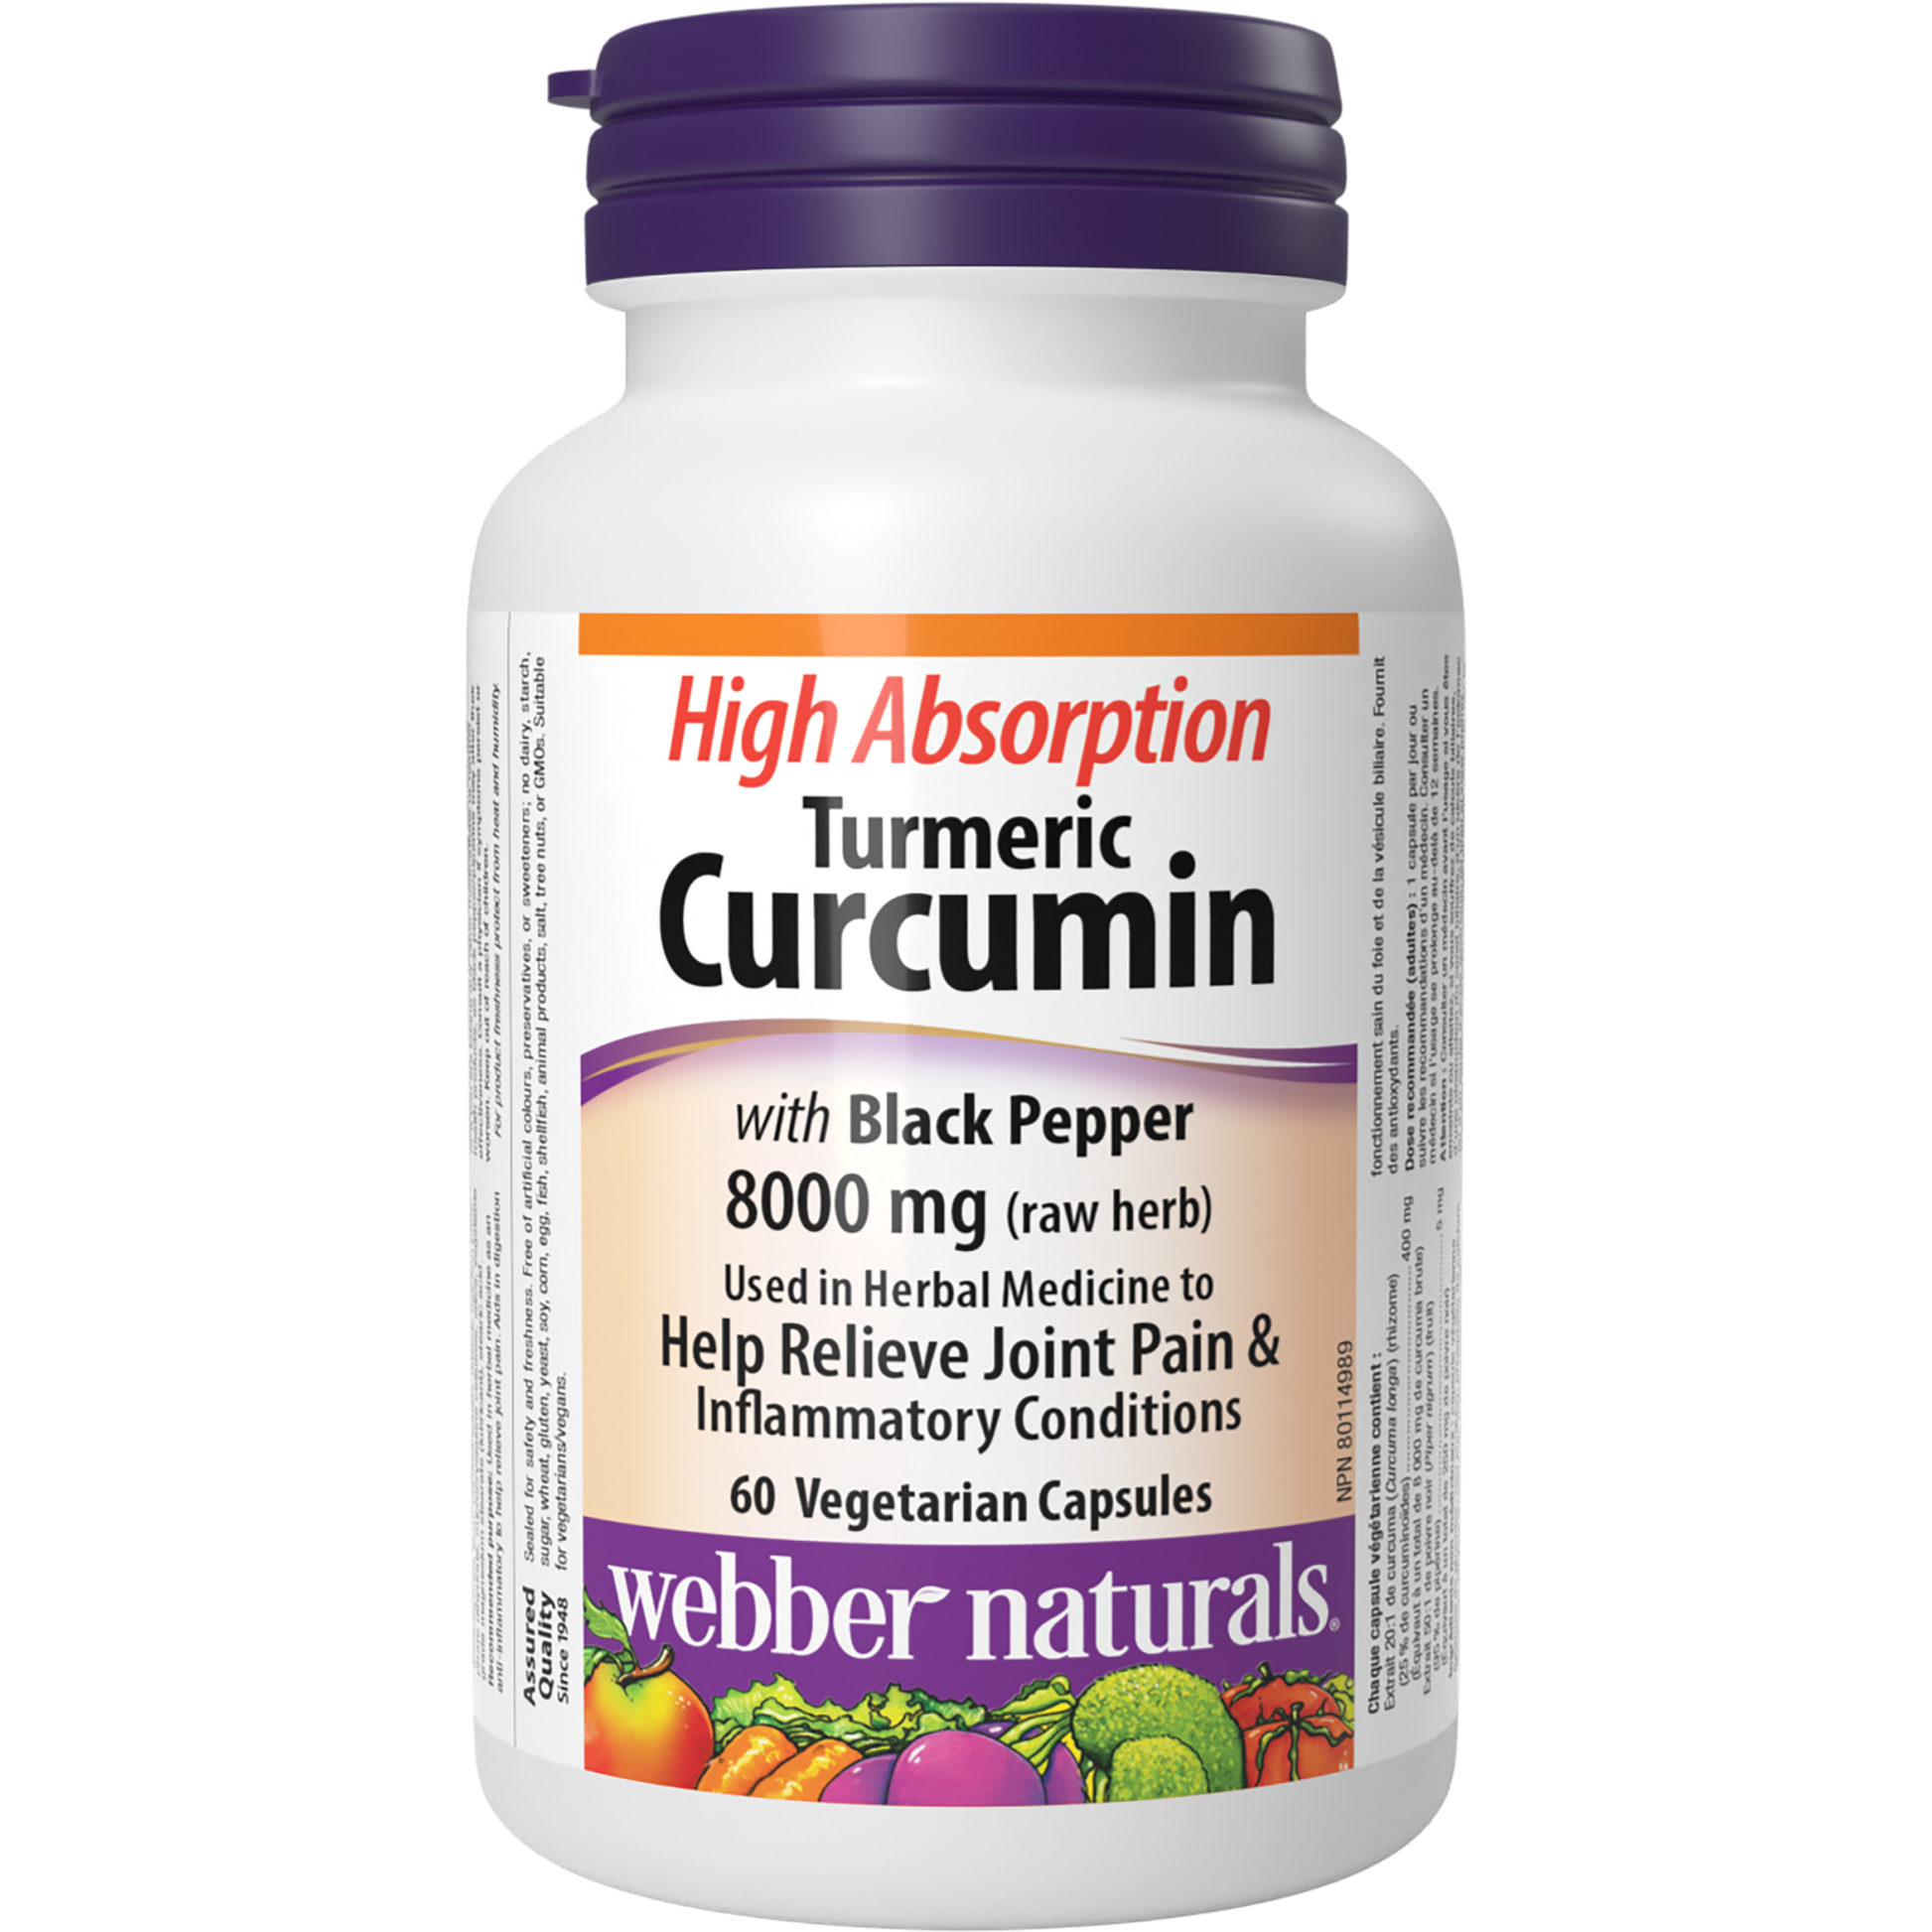 Turmeric Curcumin High Absorption with Black Pepper 8000 mg (raw herb) for Webber Naturals|v|hi-res|WN3592